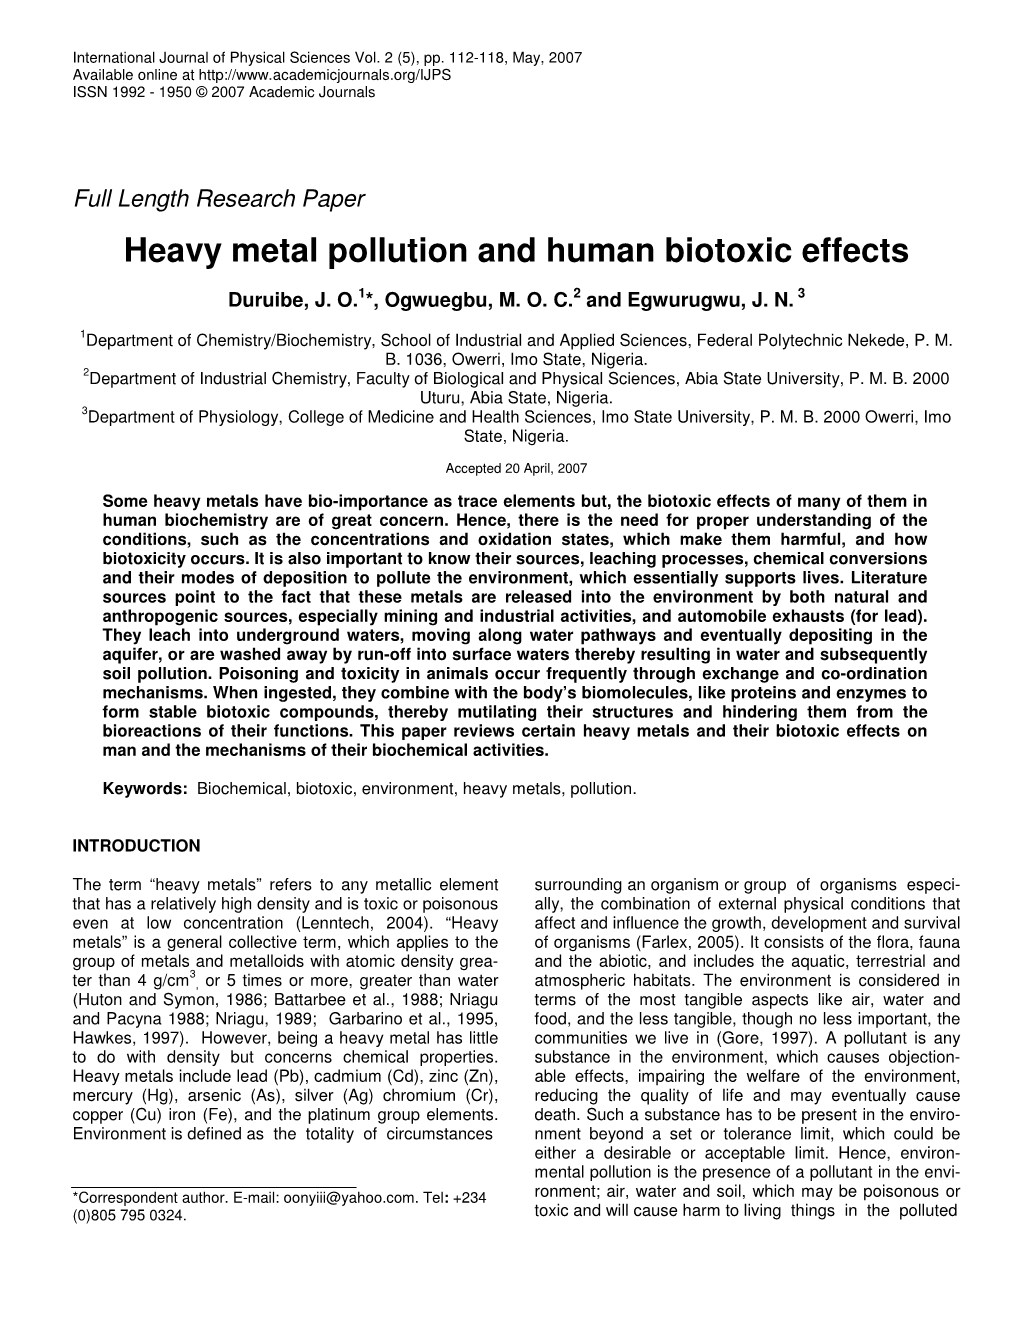 Heavy Metal Pollution and Human Biotoxic Effects